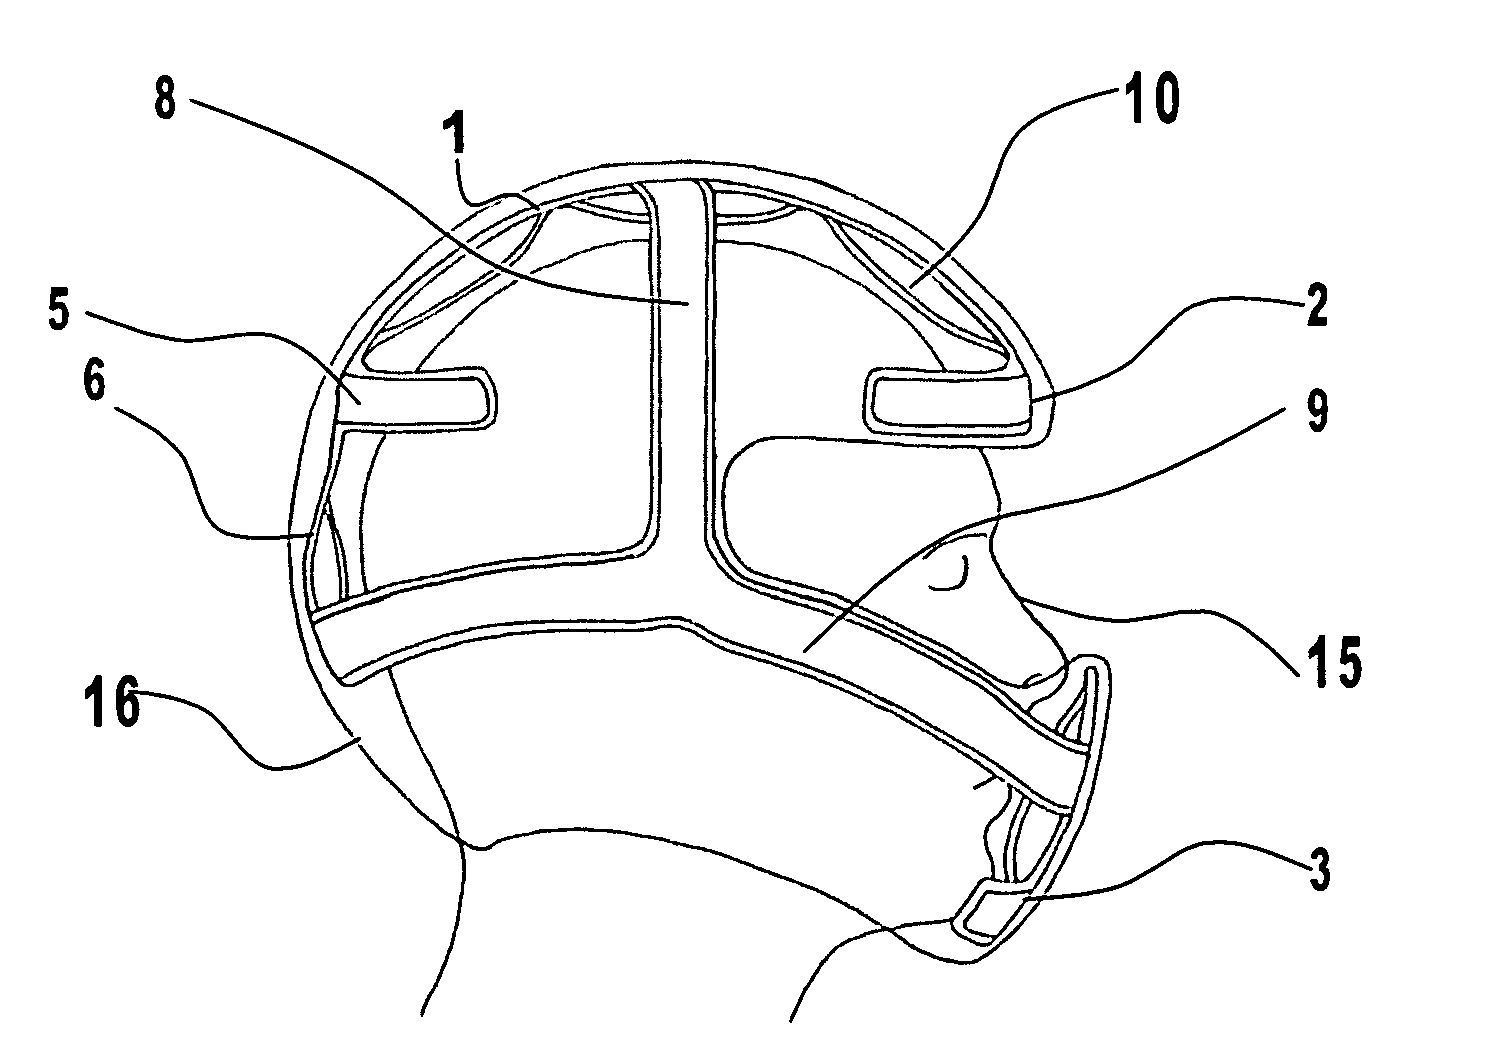 Impact Absorbing Frame and Layered Structure System for Safety Helmets